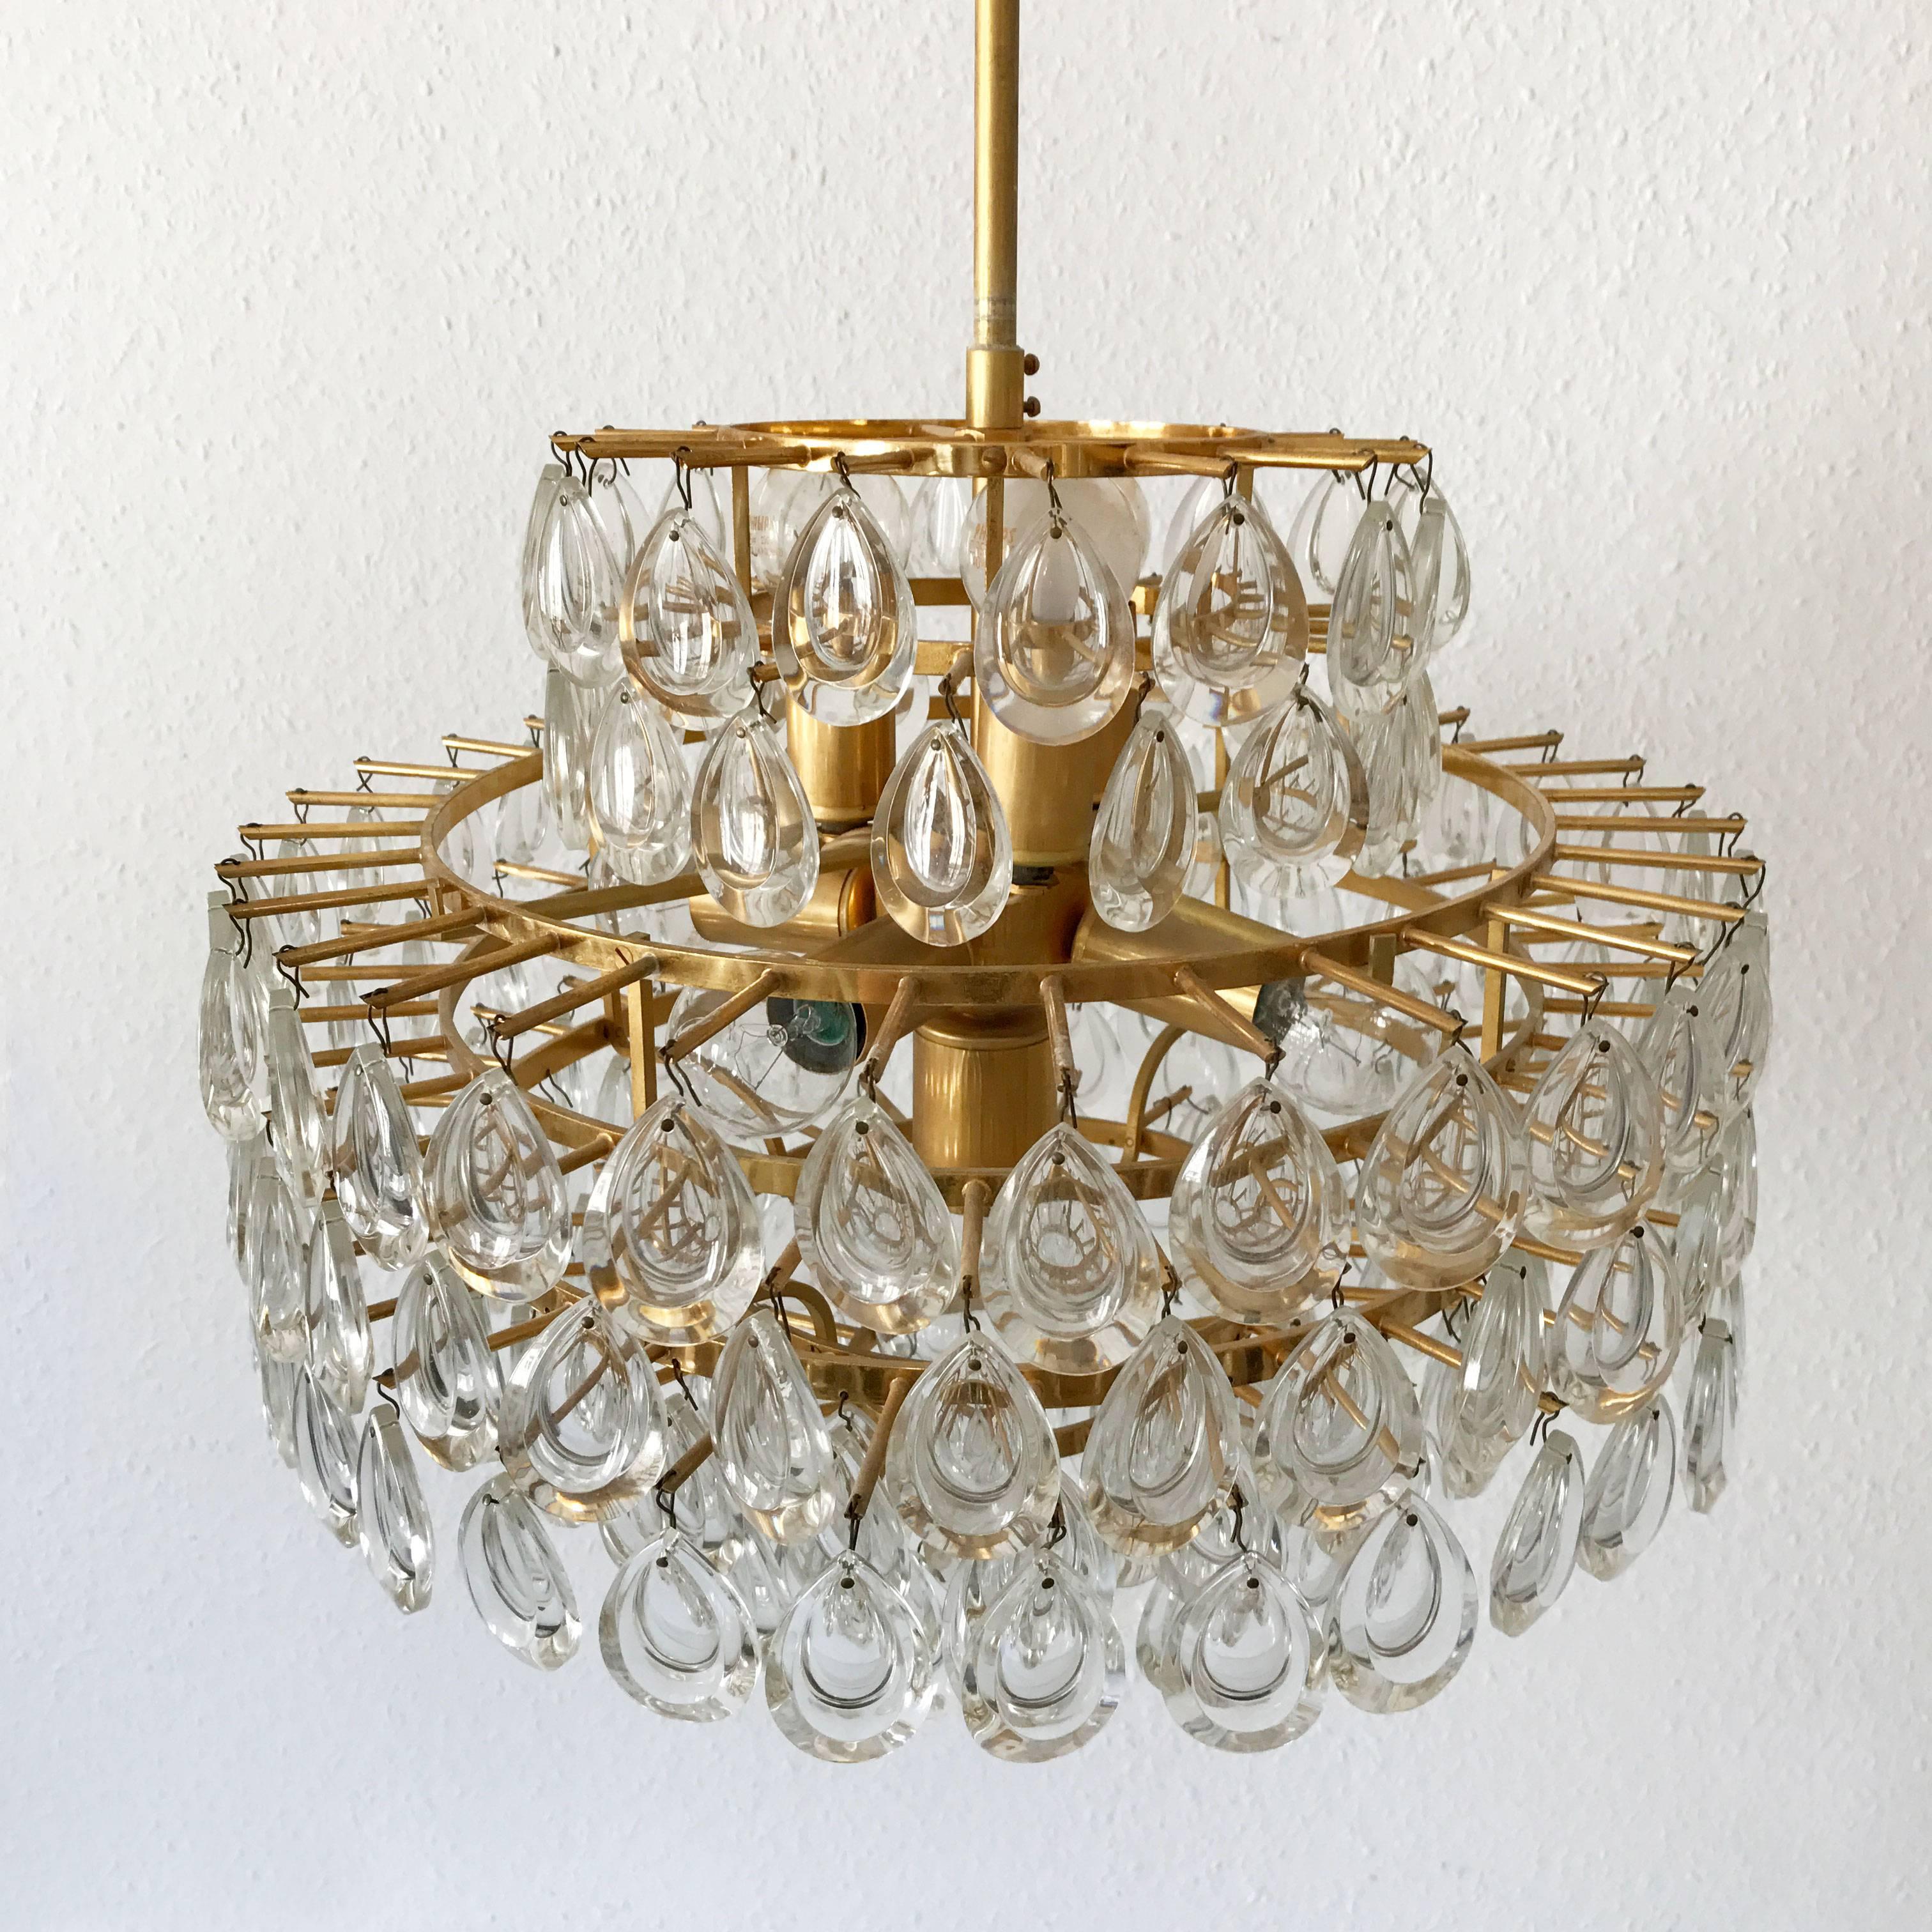 Seven-Tiered Gilt Brass Chandelier or Pendant Lamp by Palwa Germany 1960s For Sale 5